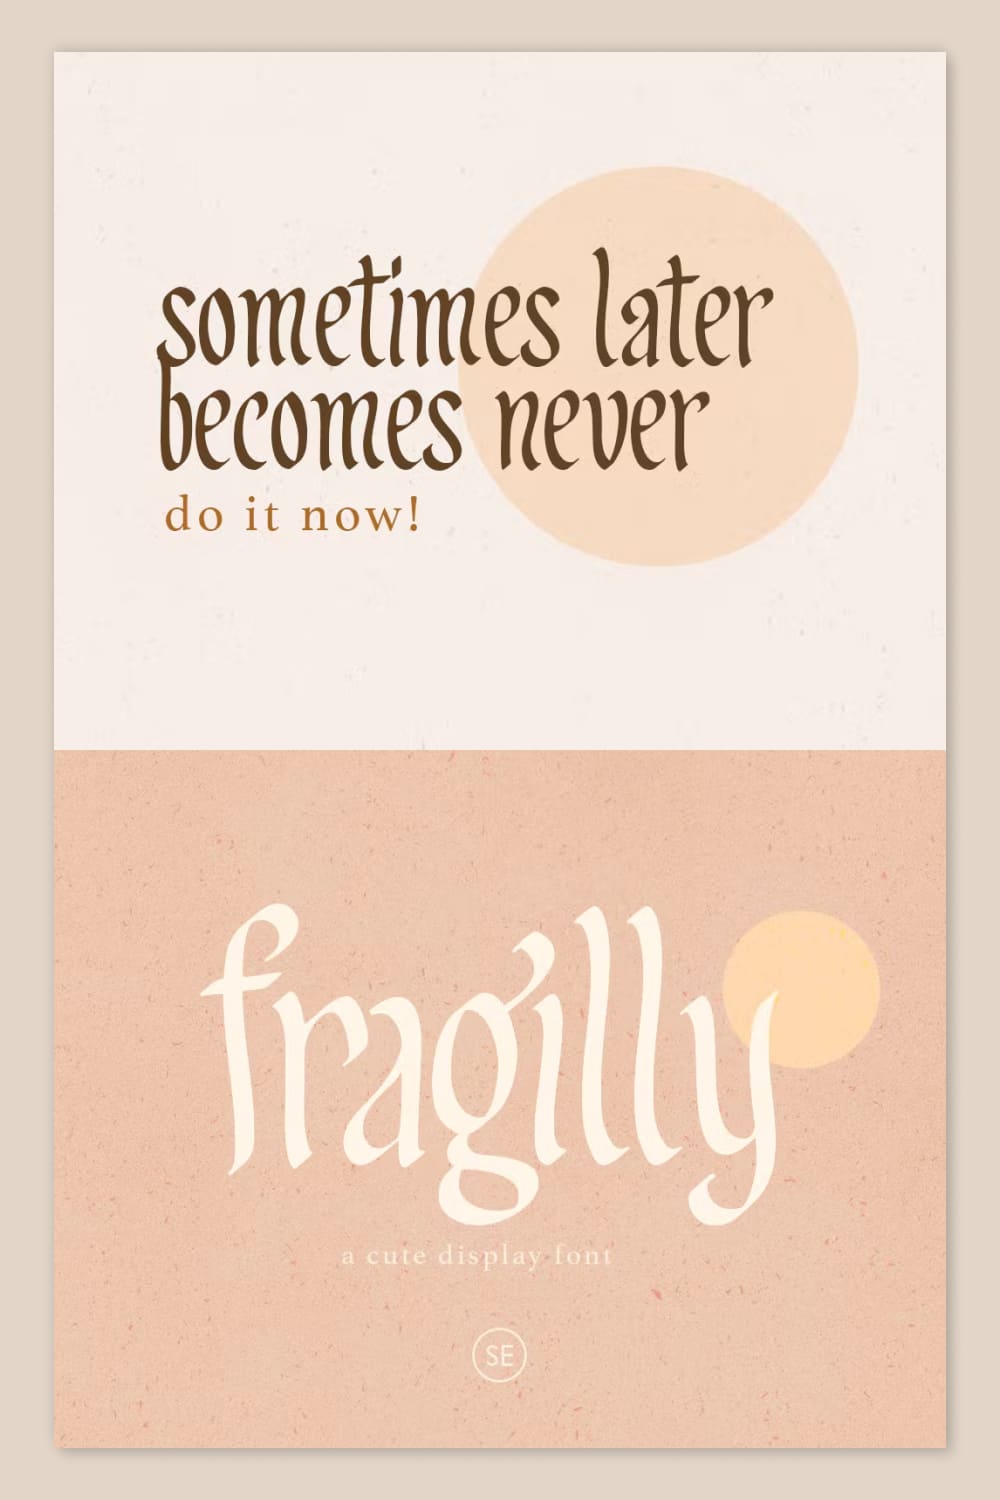 An example of a Fragilly Cute Display Font on a beige and orange background.